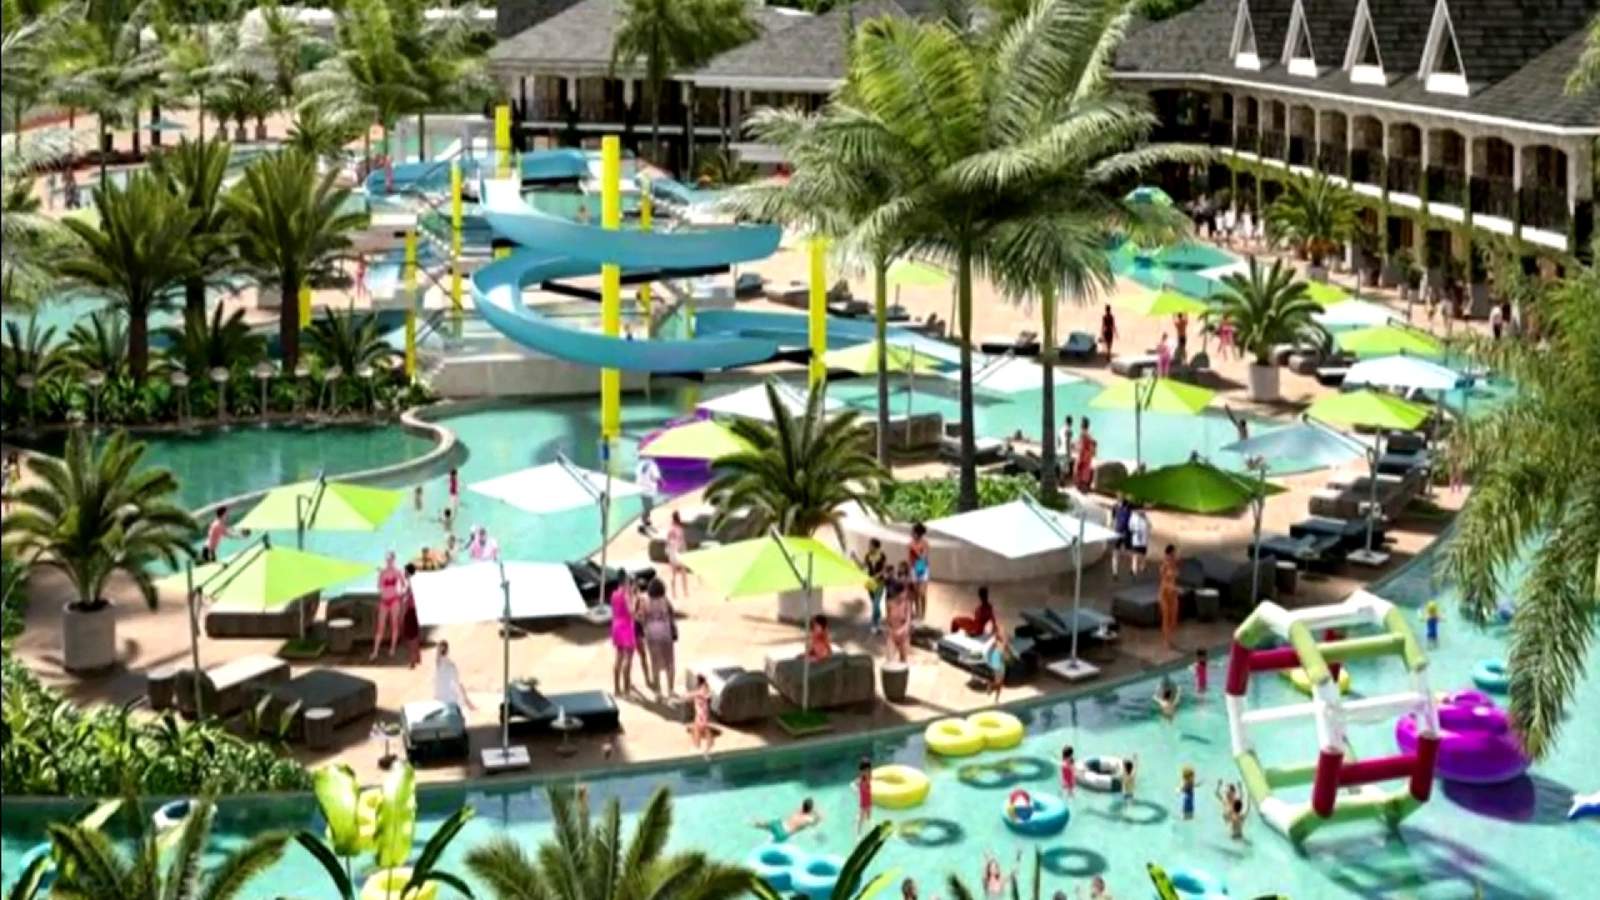 Development plan for water park at Zoo Miami has potential issue due to rare bats